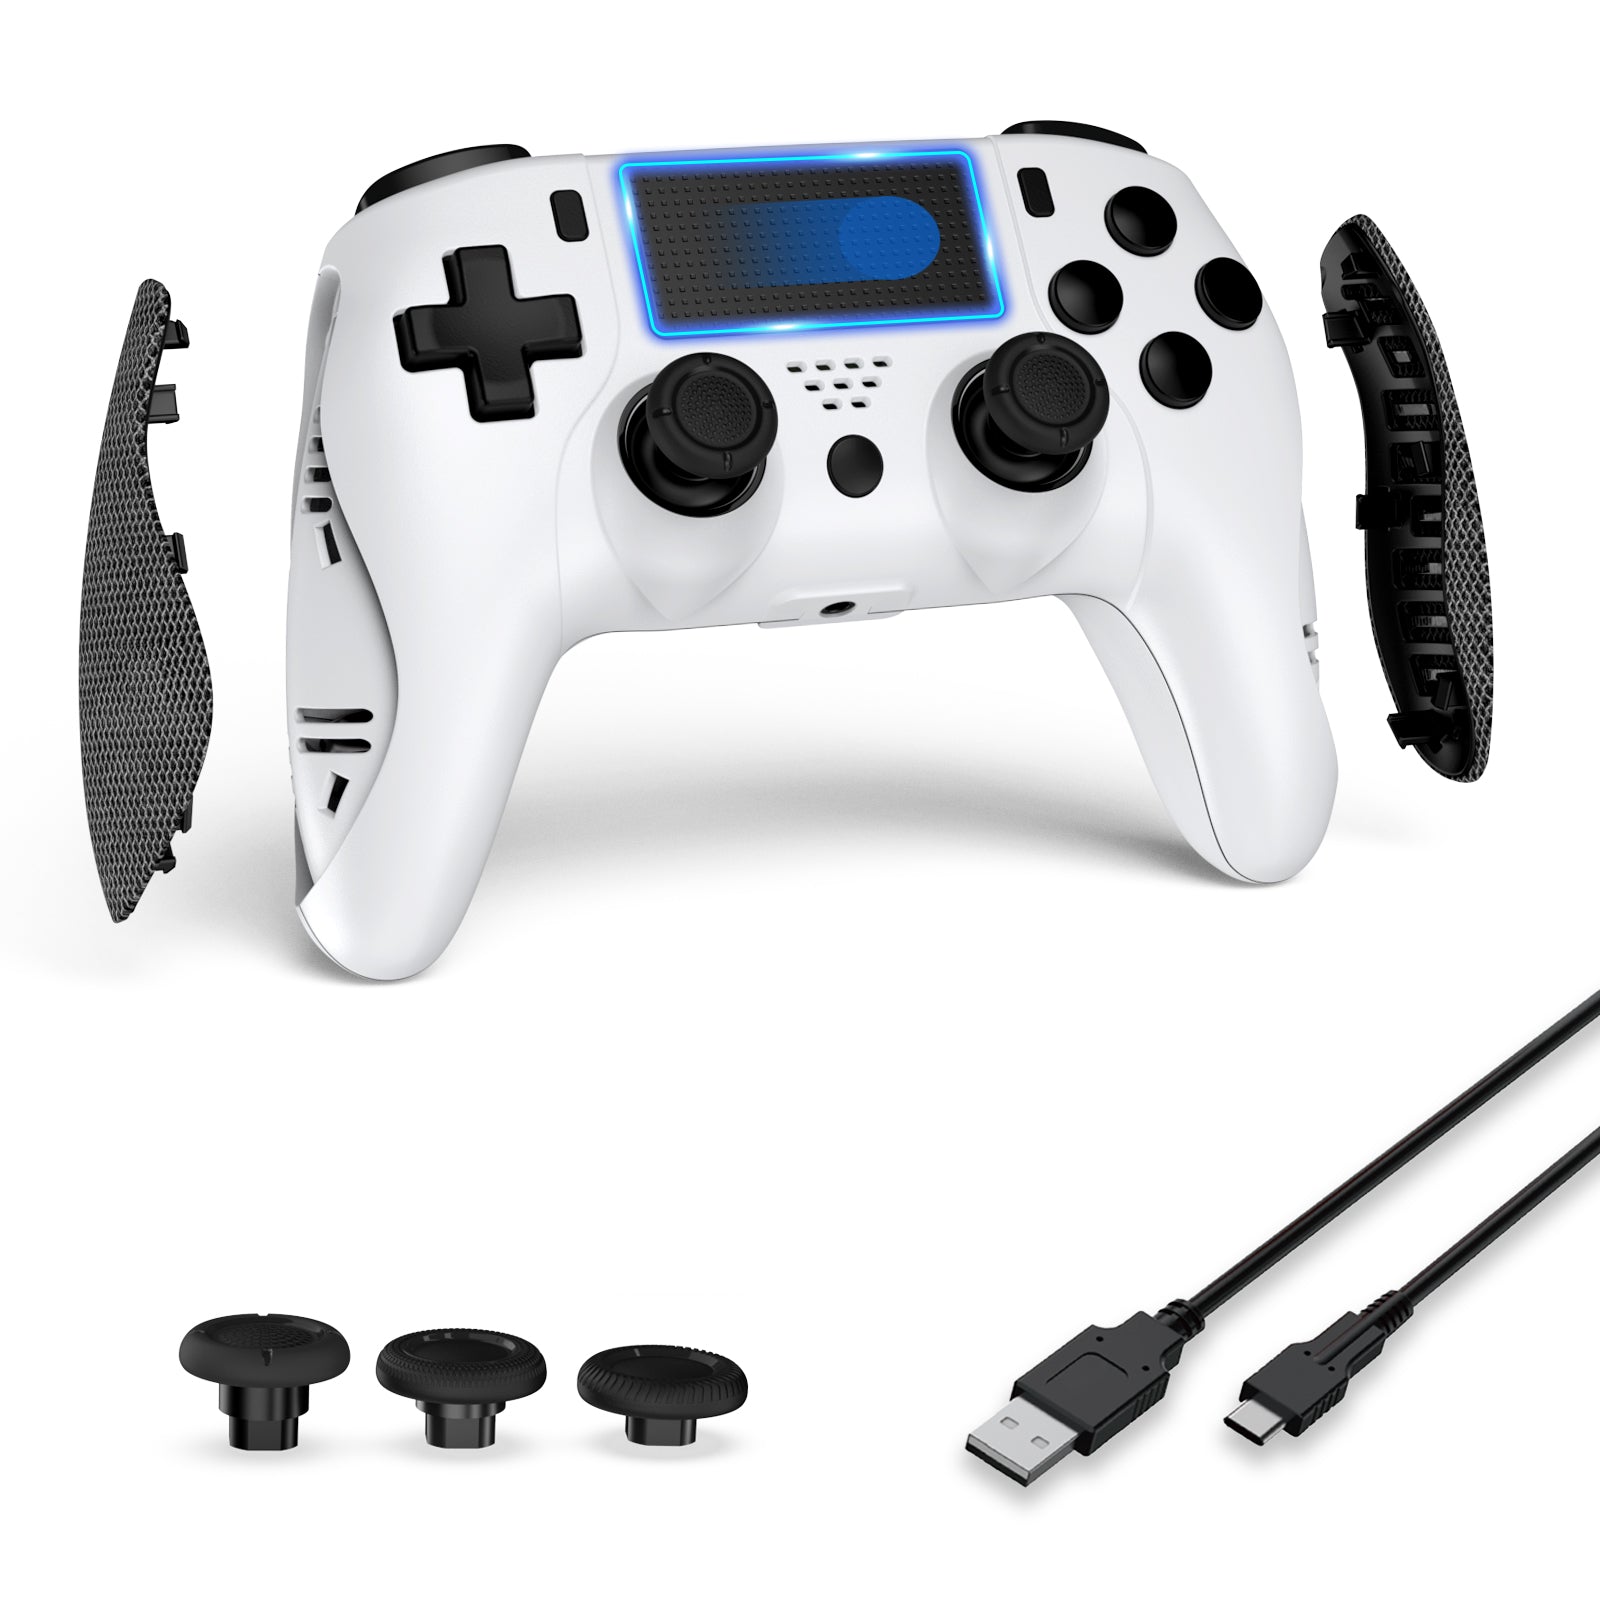 White NexiGo Wireless Game Controller for PS4, PS4 Slim, PS4 Pro with stick caps and charging cable